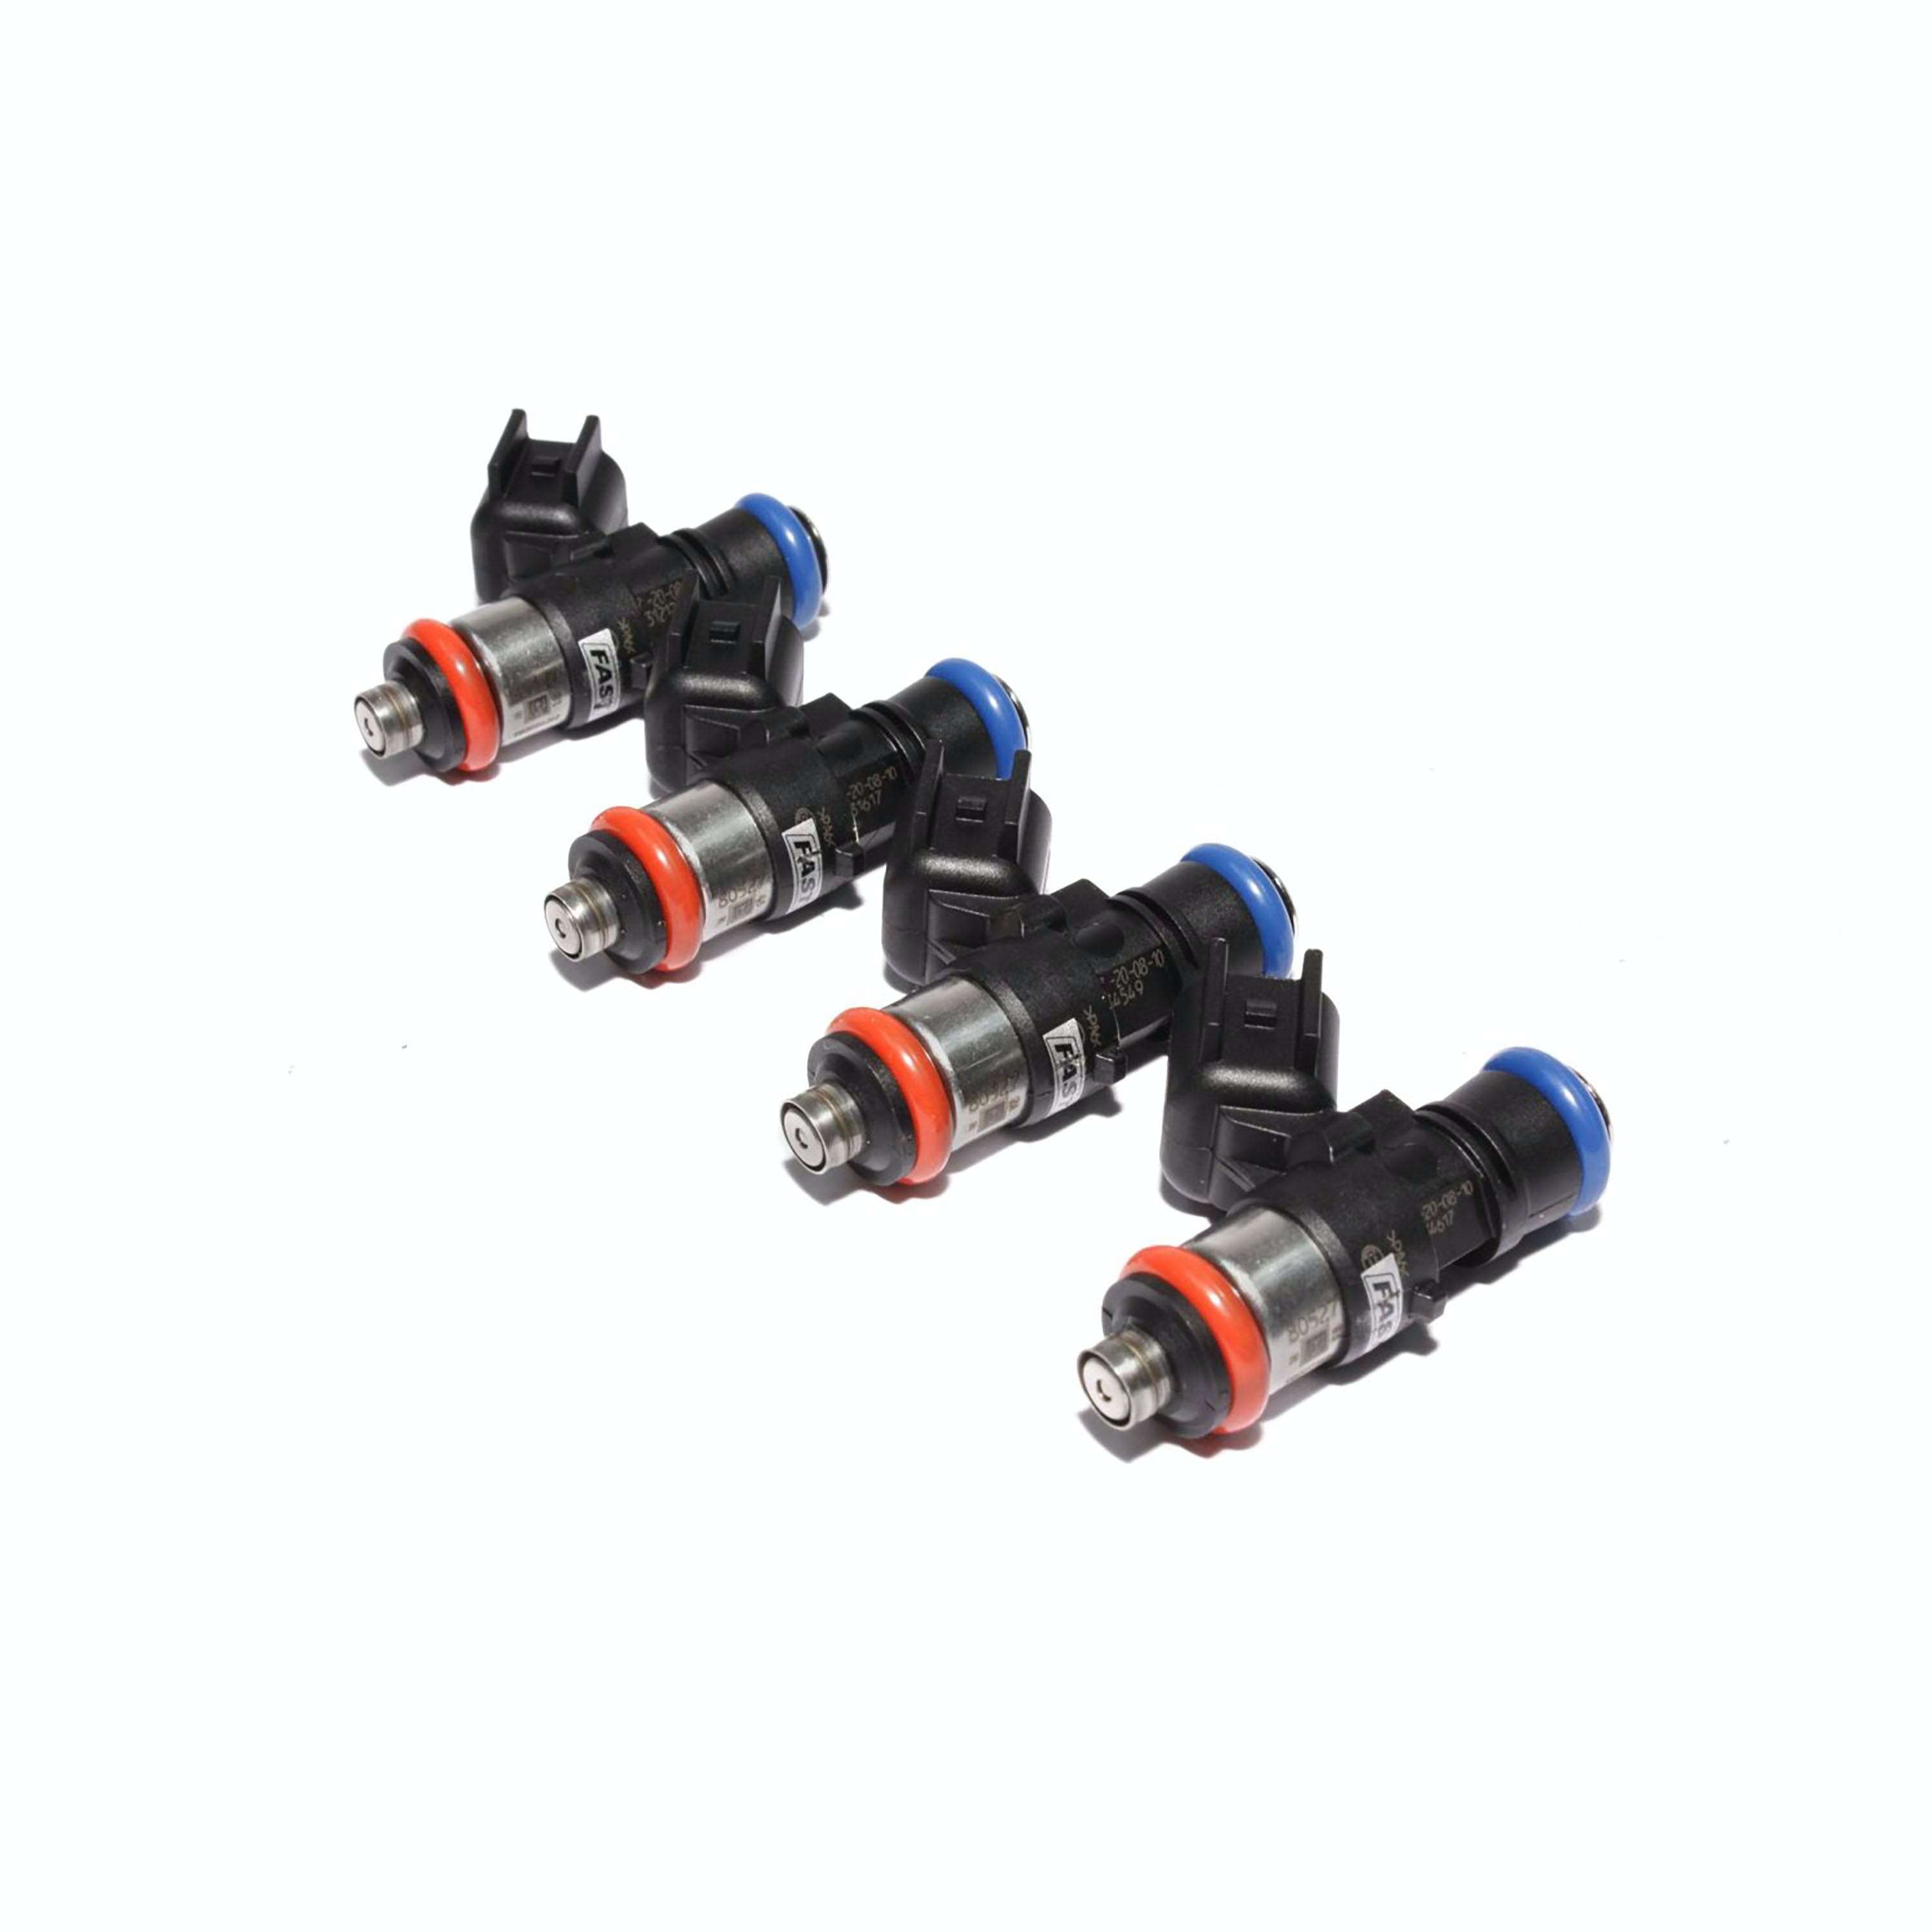 FAST - Fuel Air Spark Technology 30859-4 Injector, Fast 4-Pack 85 Lb/Hr 598.5Cc/M